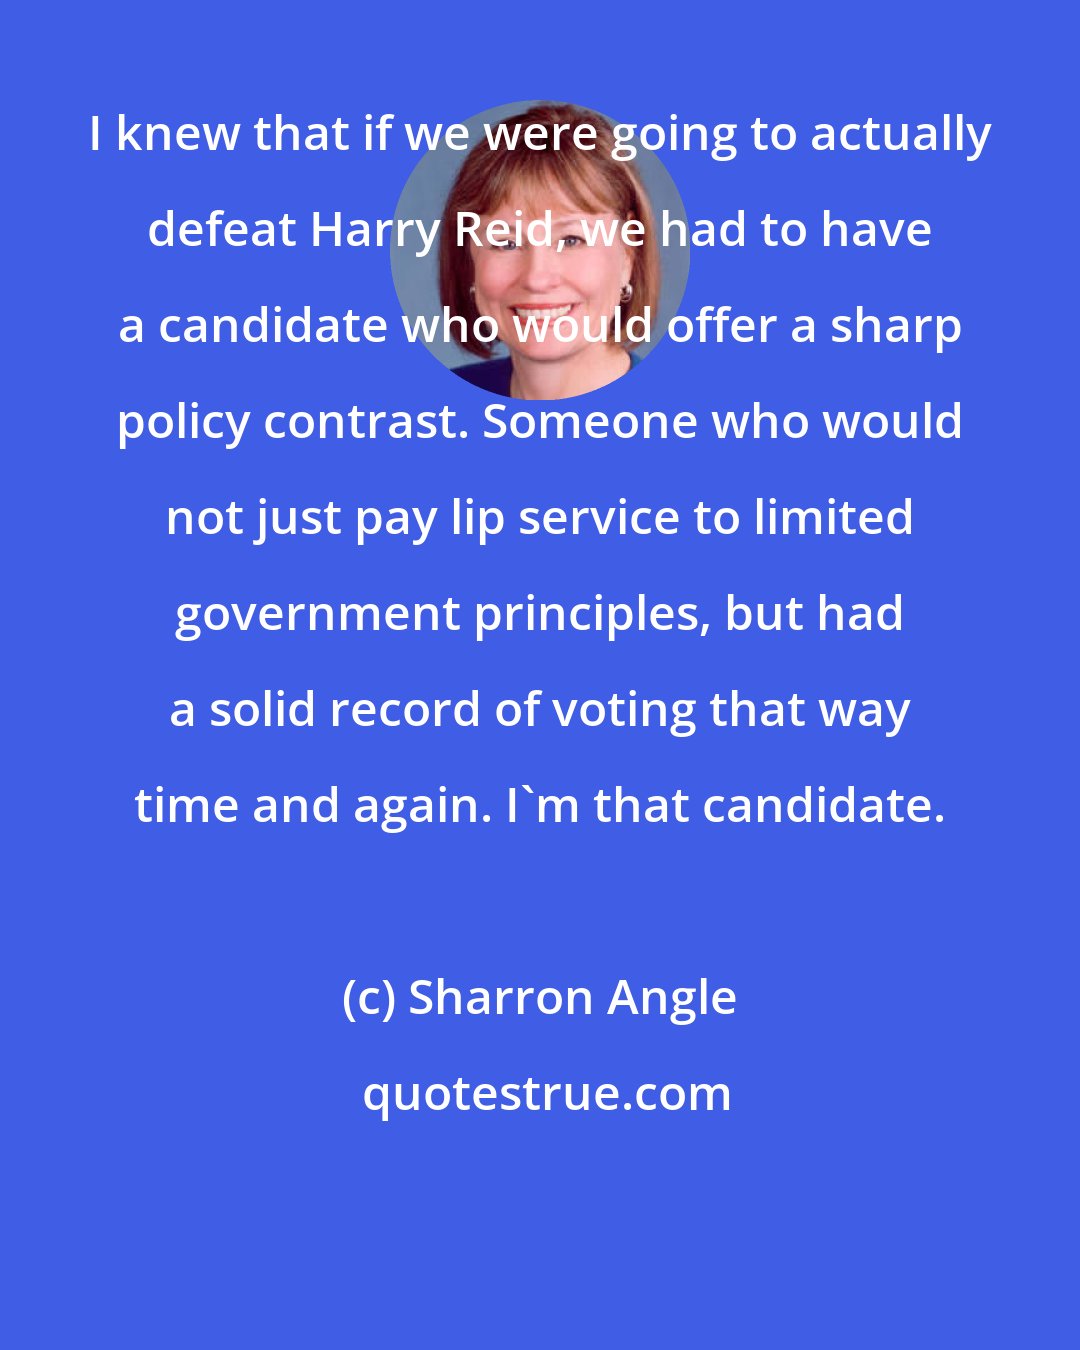 Sharron Angle: I knew that if we were going to actually defeat Harry Reid, we had to have a candidate who would offer a sharp policy contrast. Someone who would not just pay lip service to limited government principles, but had a solid record of voting that way time and again. I'm that candidate.